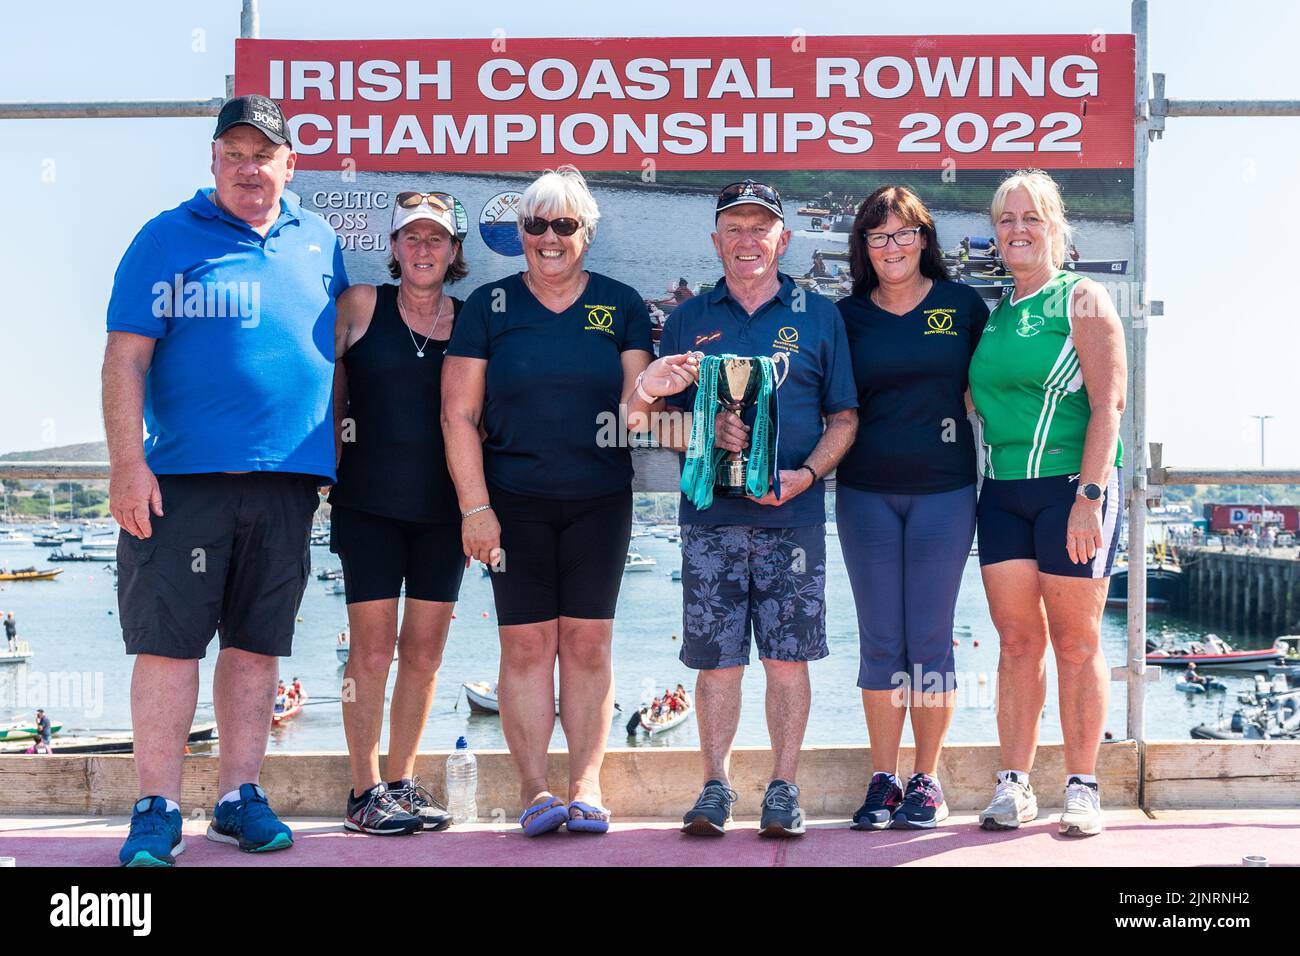 Schull, West Cork, Ireland. 13th Aug, 2022. The 2022 Irish Coastal Rowing Championships is taking place this weekend in Schull, West Cork. A total of 290 crews from different clubs are taking part in the event which finishes Sunday evening. Chairman of the regatta, Ted McSweeny, presents a trophy to Rushbrooke Rowing Club. Credit: AG News/Alamy Live News Stock Photo